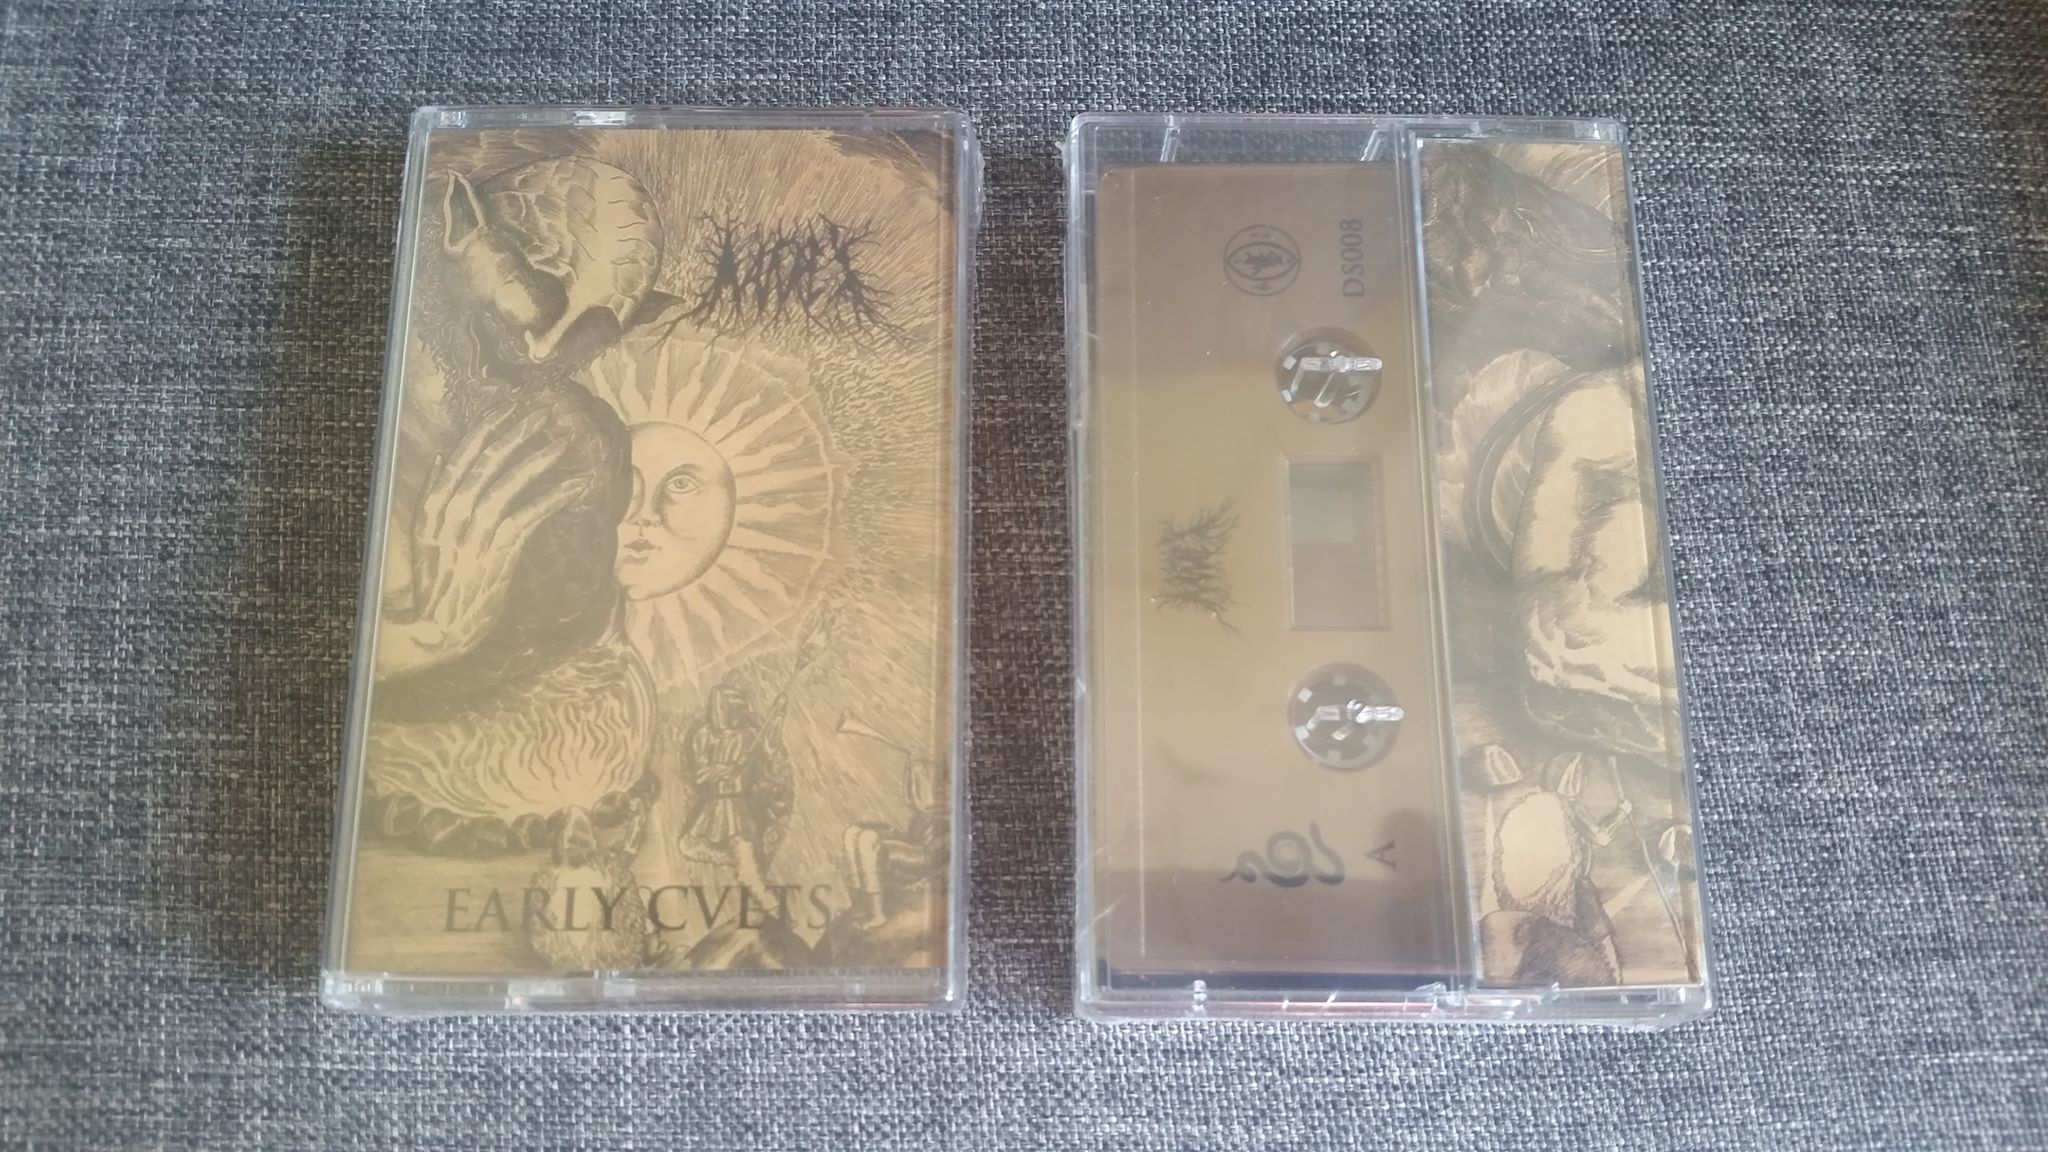 Natvre's - Early Cvlts (Limited Edition Cassette)